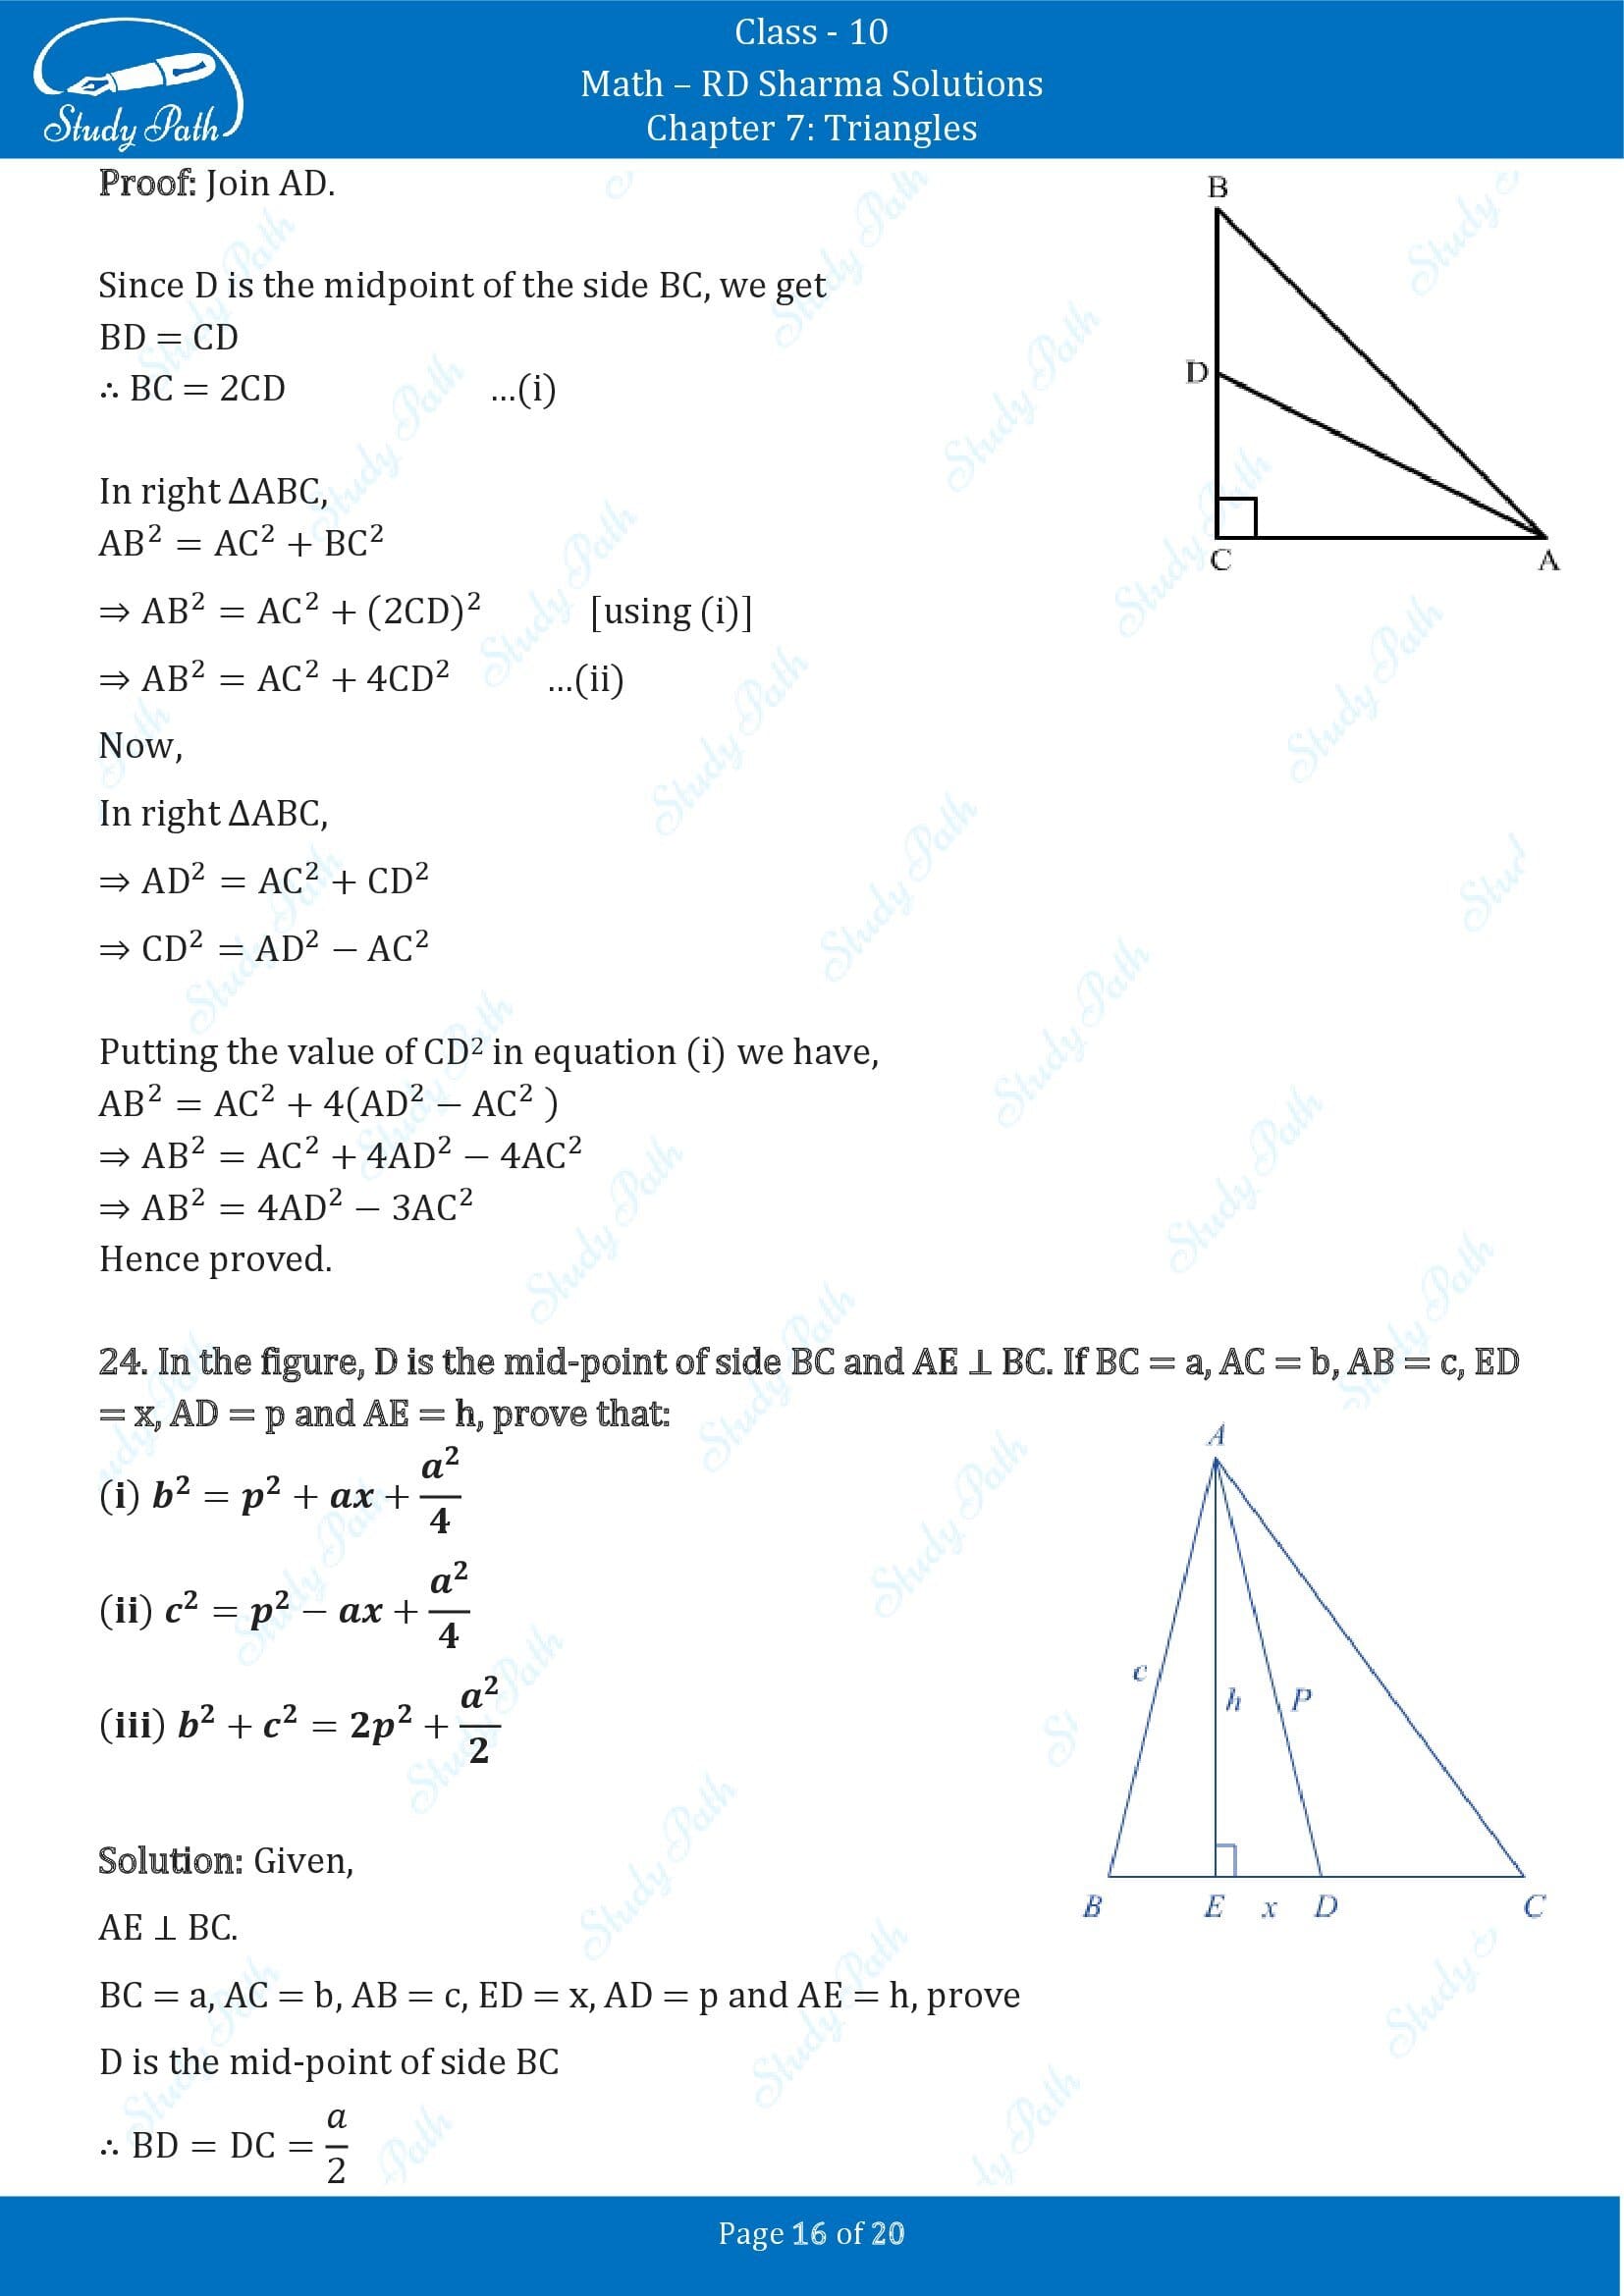 RD Sharma Solutions Class 10 Chapter 7 Triangles Exercise 7.7 00016